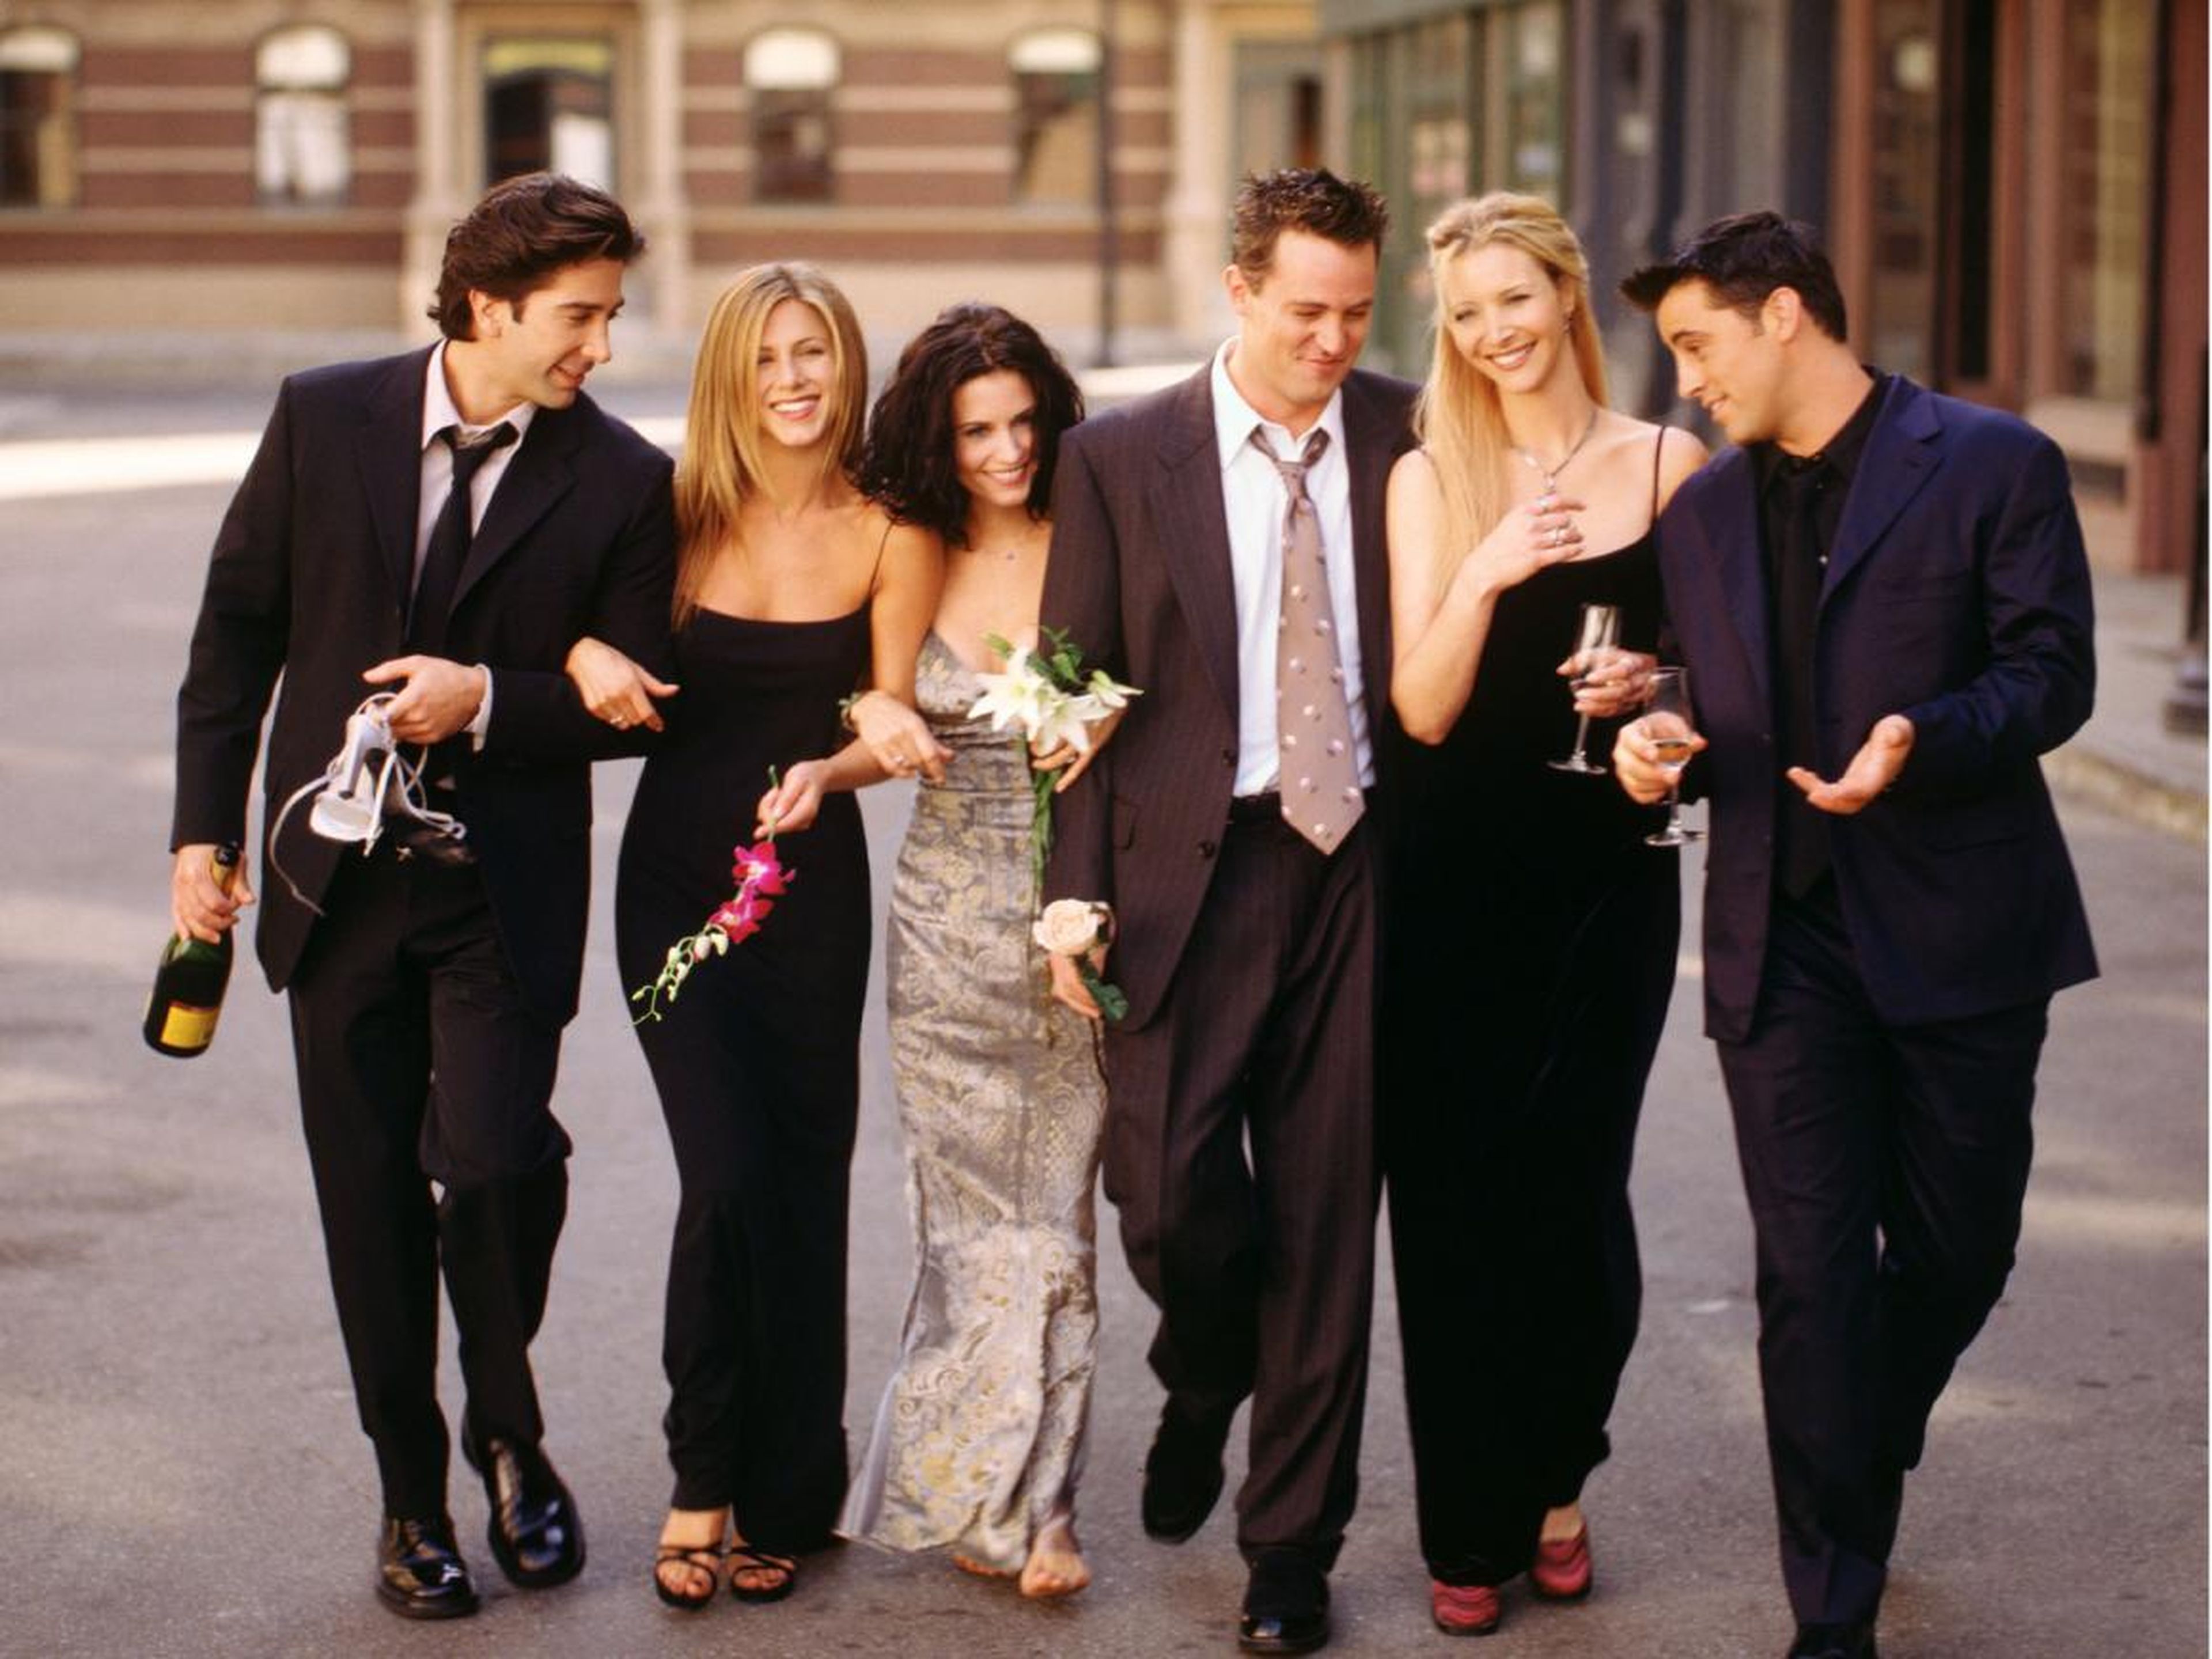 In 2002, riding the tide of high ratings, the six principal "Friends" cast members banded together to negotiate $1-million-per-episode pay raises that amounted to $22 million per season.